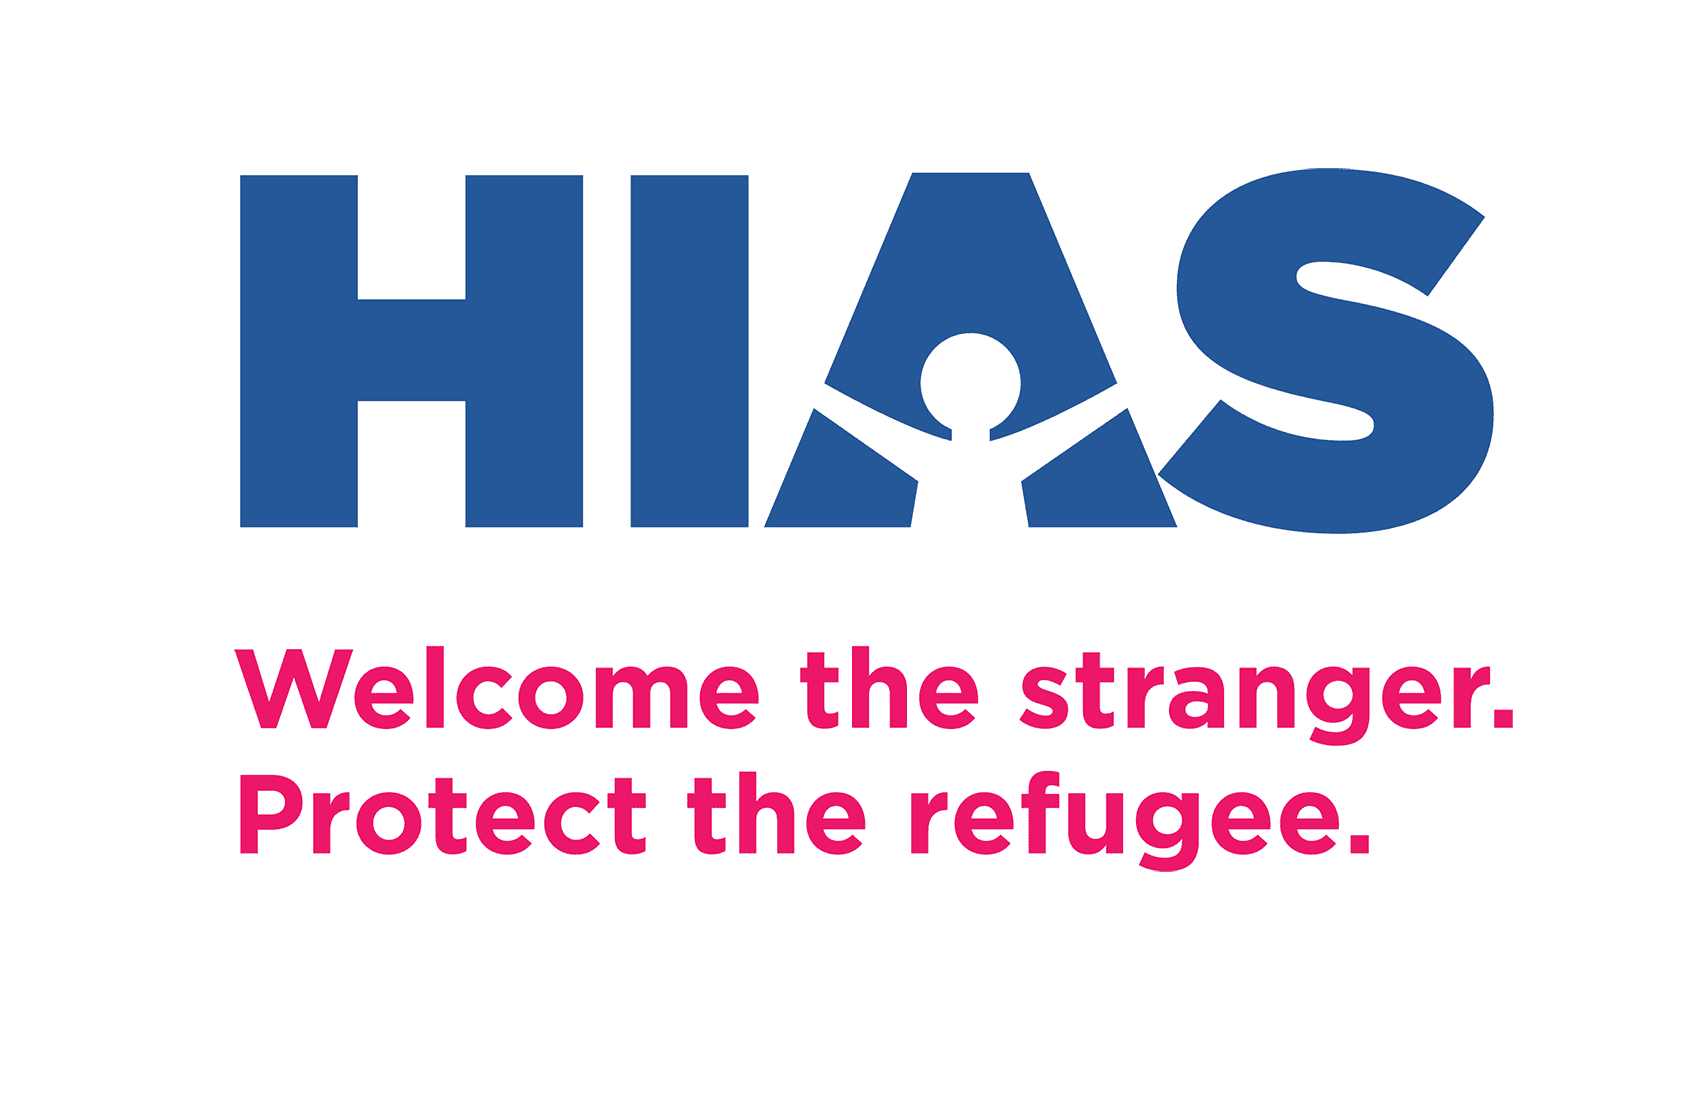 EU-CELAC Summit: HIAS Calls for Renewed Commitments to Support Forcibly Displaced People